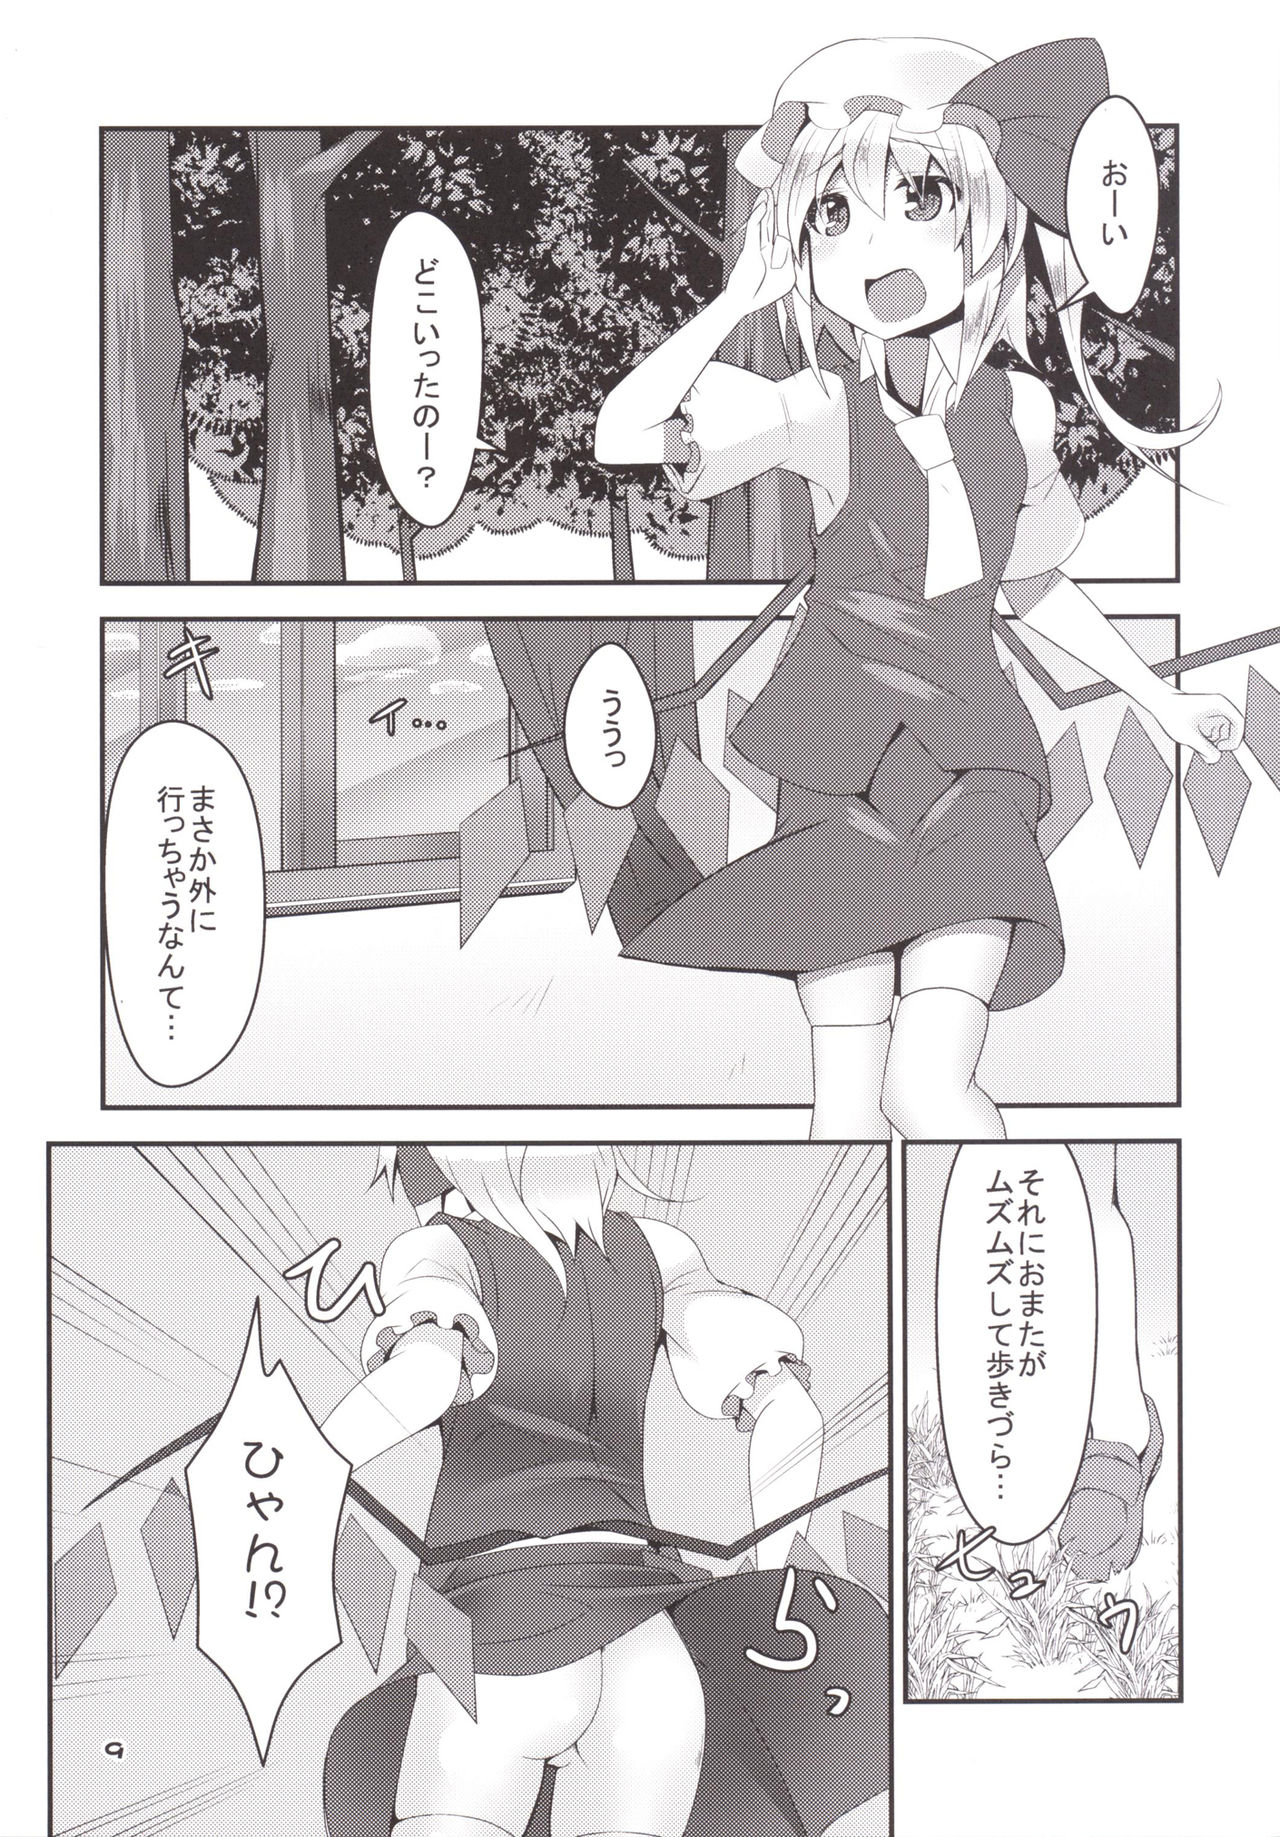 [Angelic Feather (Land Sale)] Otimpo Hunter Flandle (Touhou Project) [Digital] page 8 full